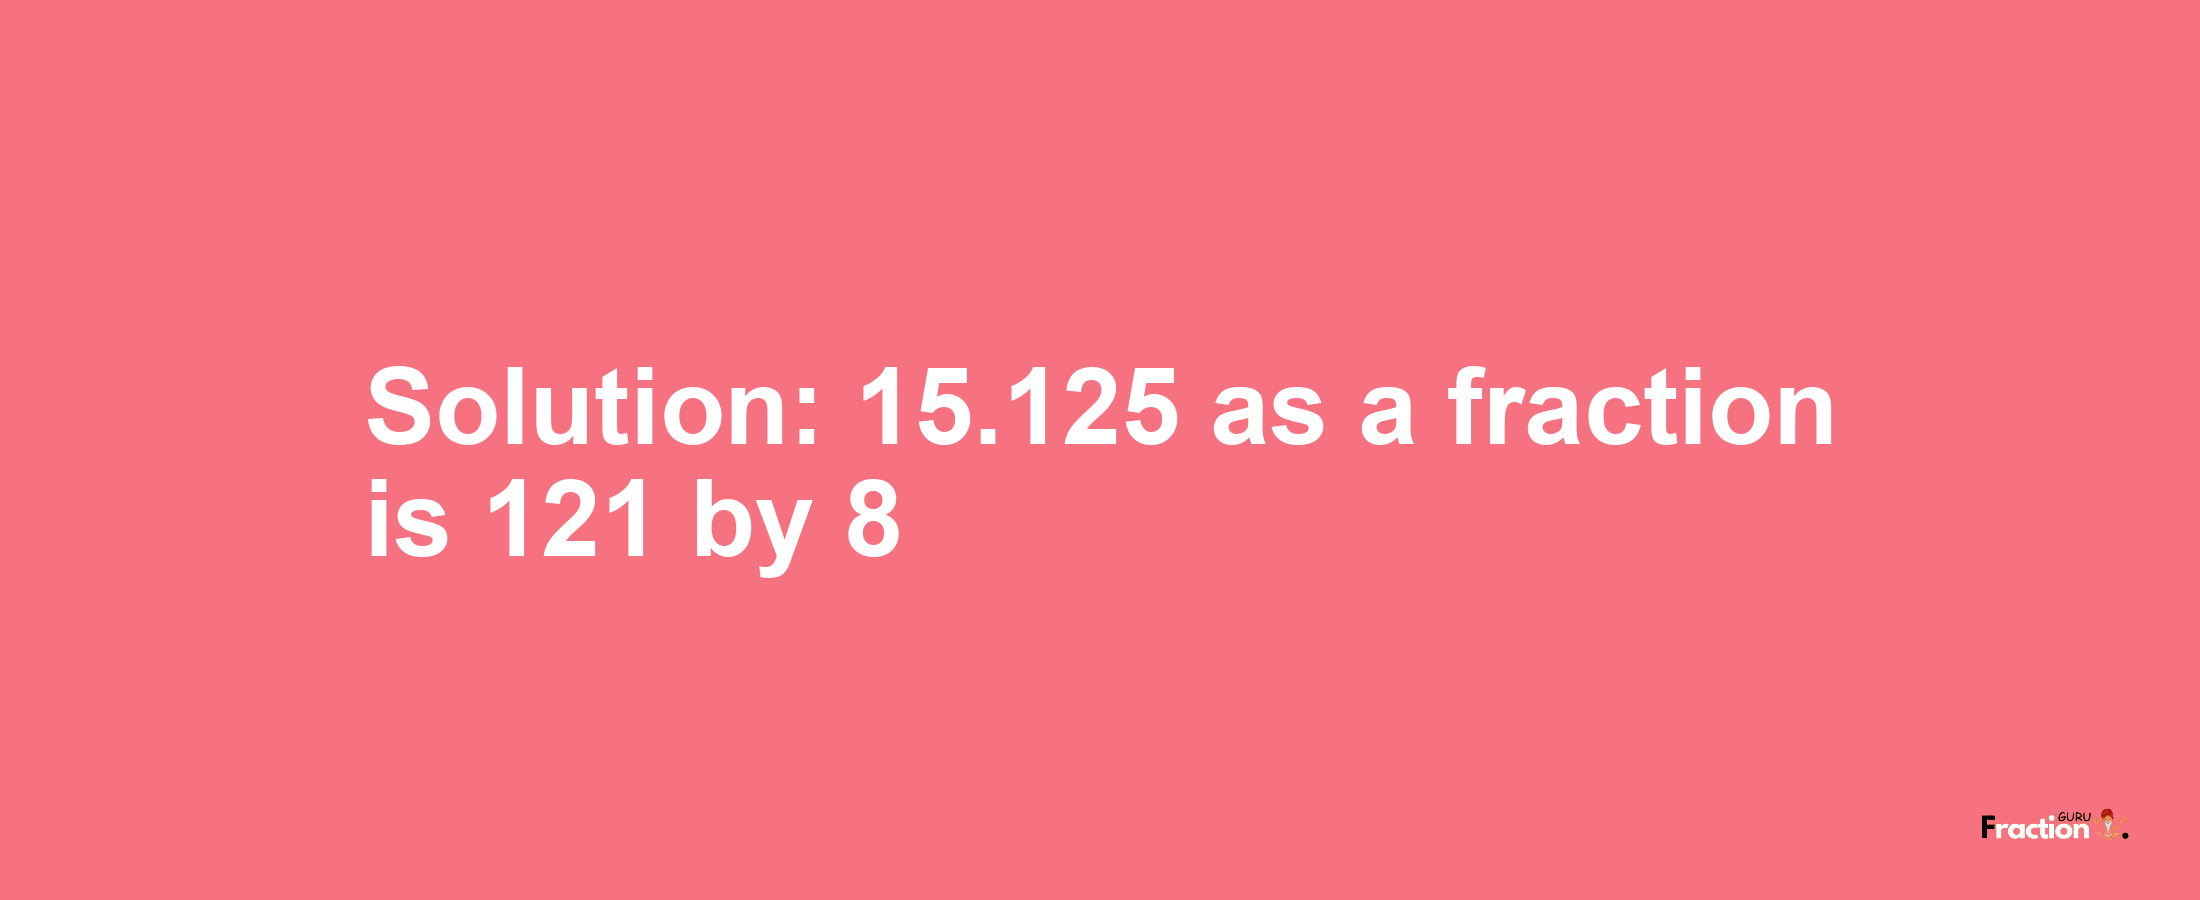 Solution:15.125 as a fraction is 121/8